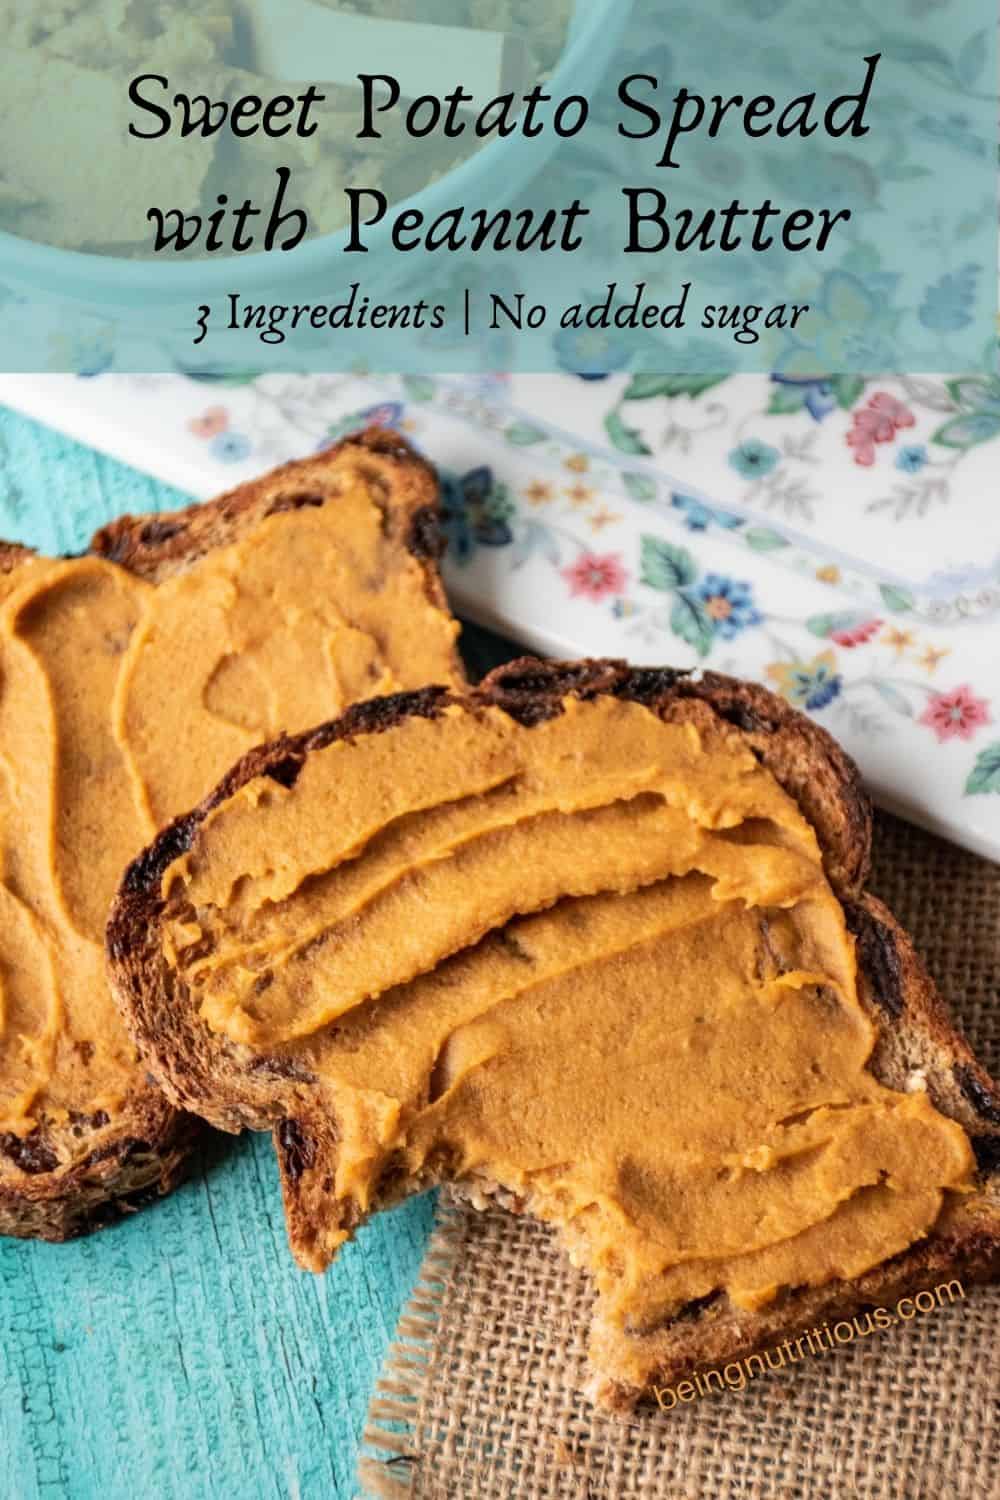 Two pieces of toast with a spread made of sweet potatoes and peanut butter. Text overlay: Sweet Potato Spread with Peanut Butter; 3 ingredients, no added sugar.